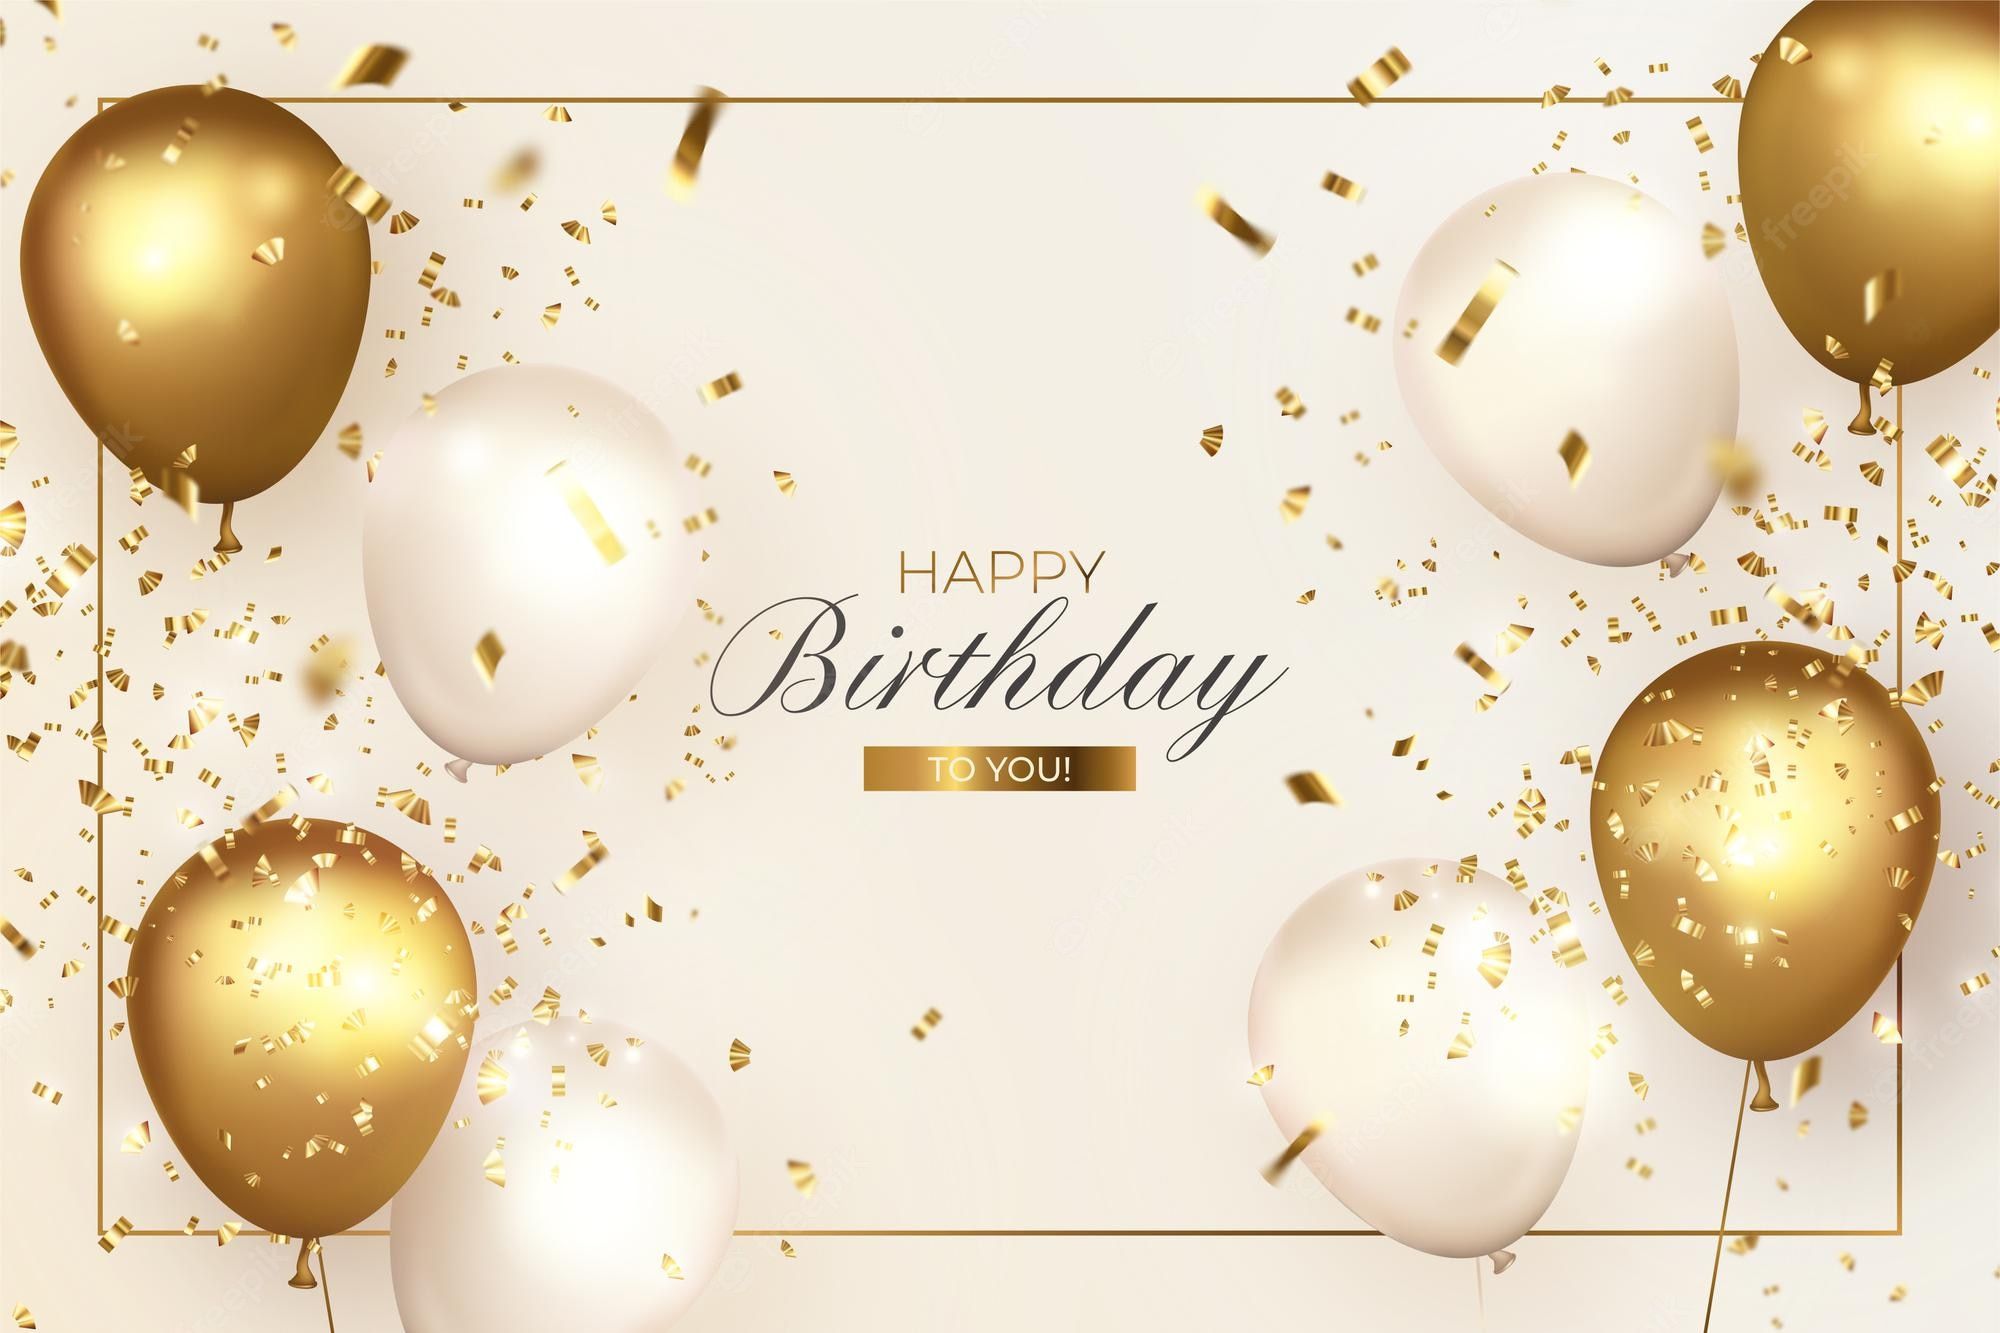 Birthday background with golden and white balloons and confetti on a light background - Birthday